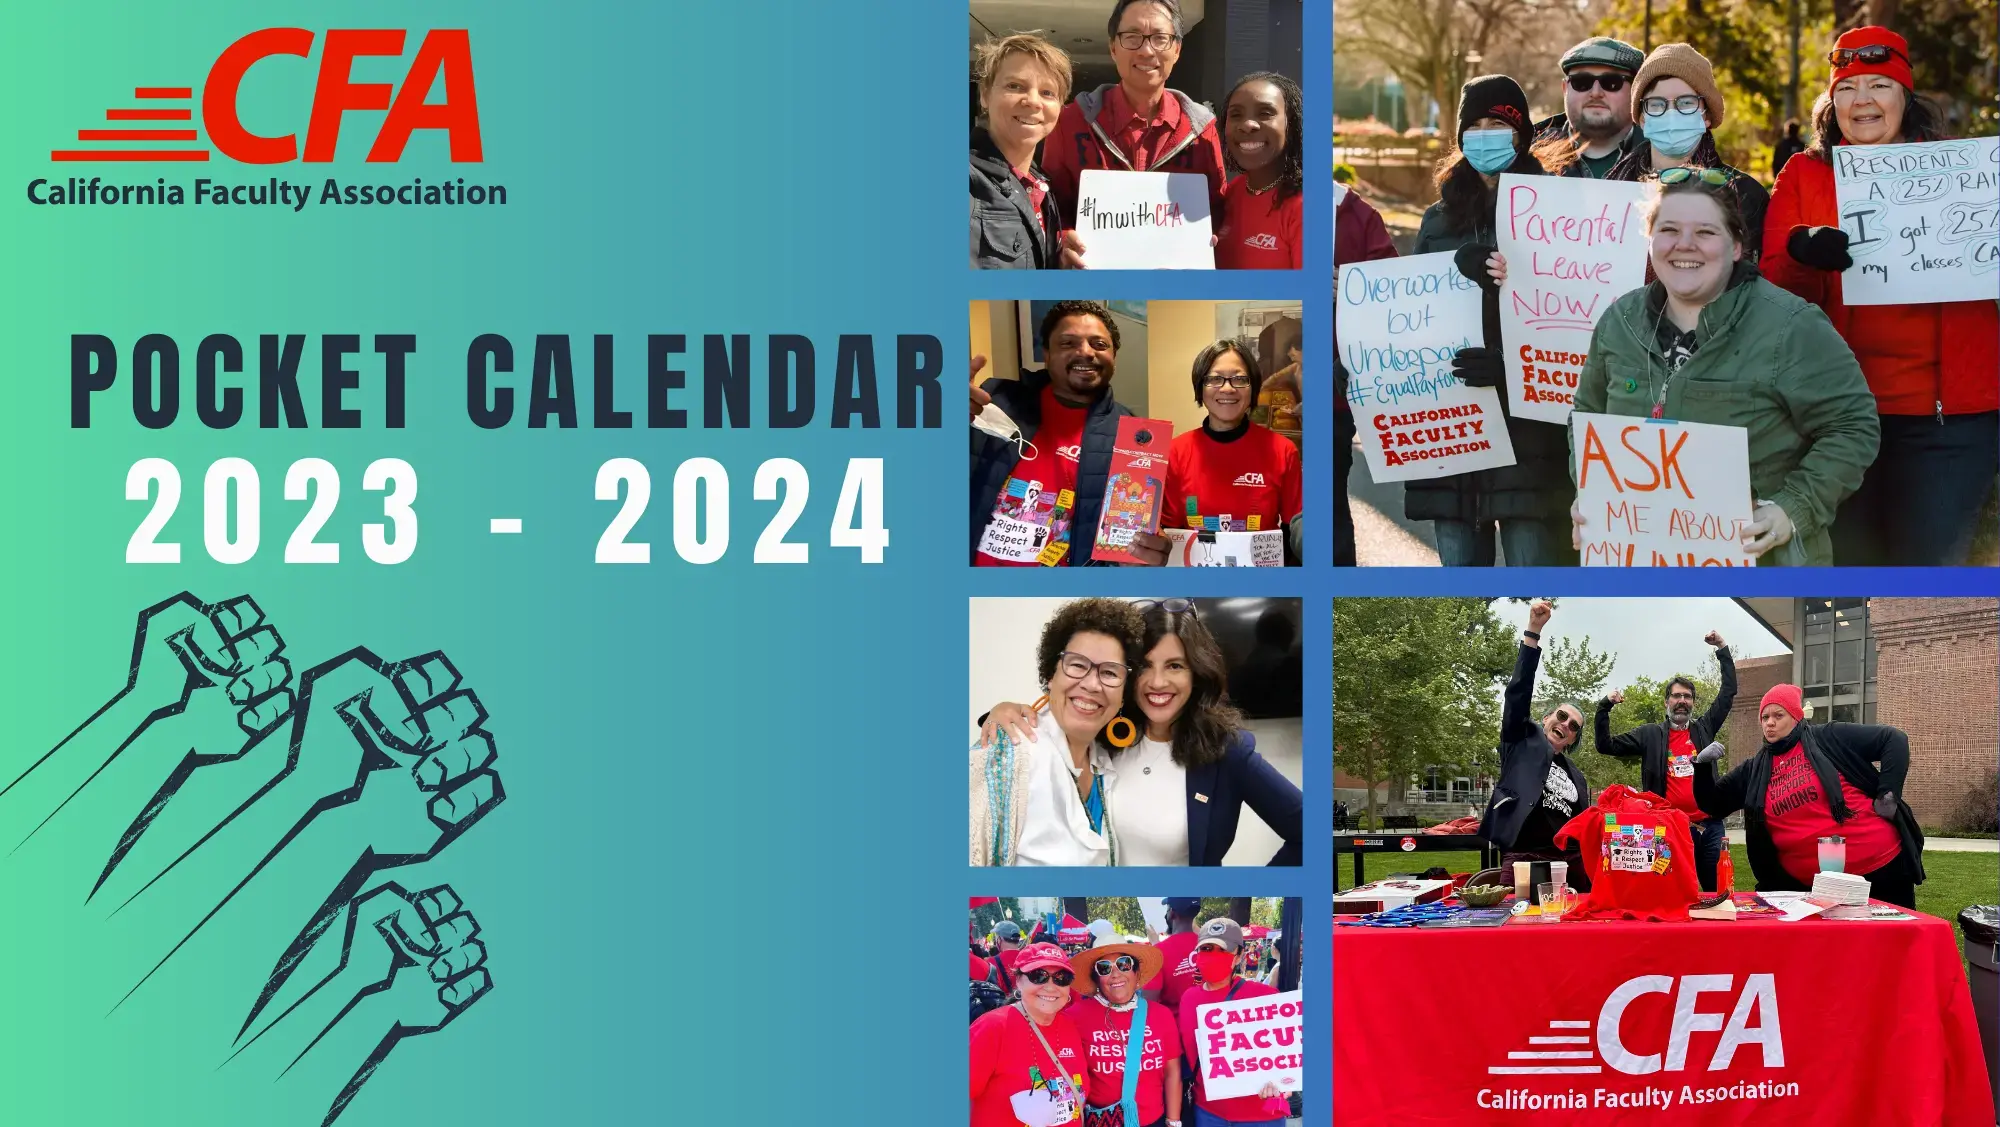 Cover artwork for the 2021-22 pocket calendar includes groups of CFA members and a member holding a sign saying "Equality for All."